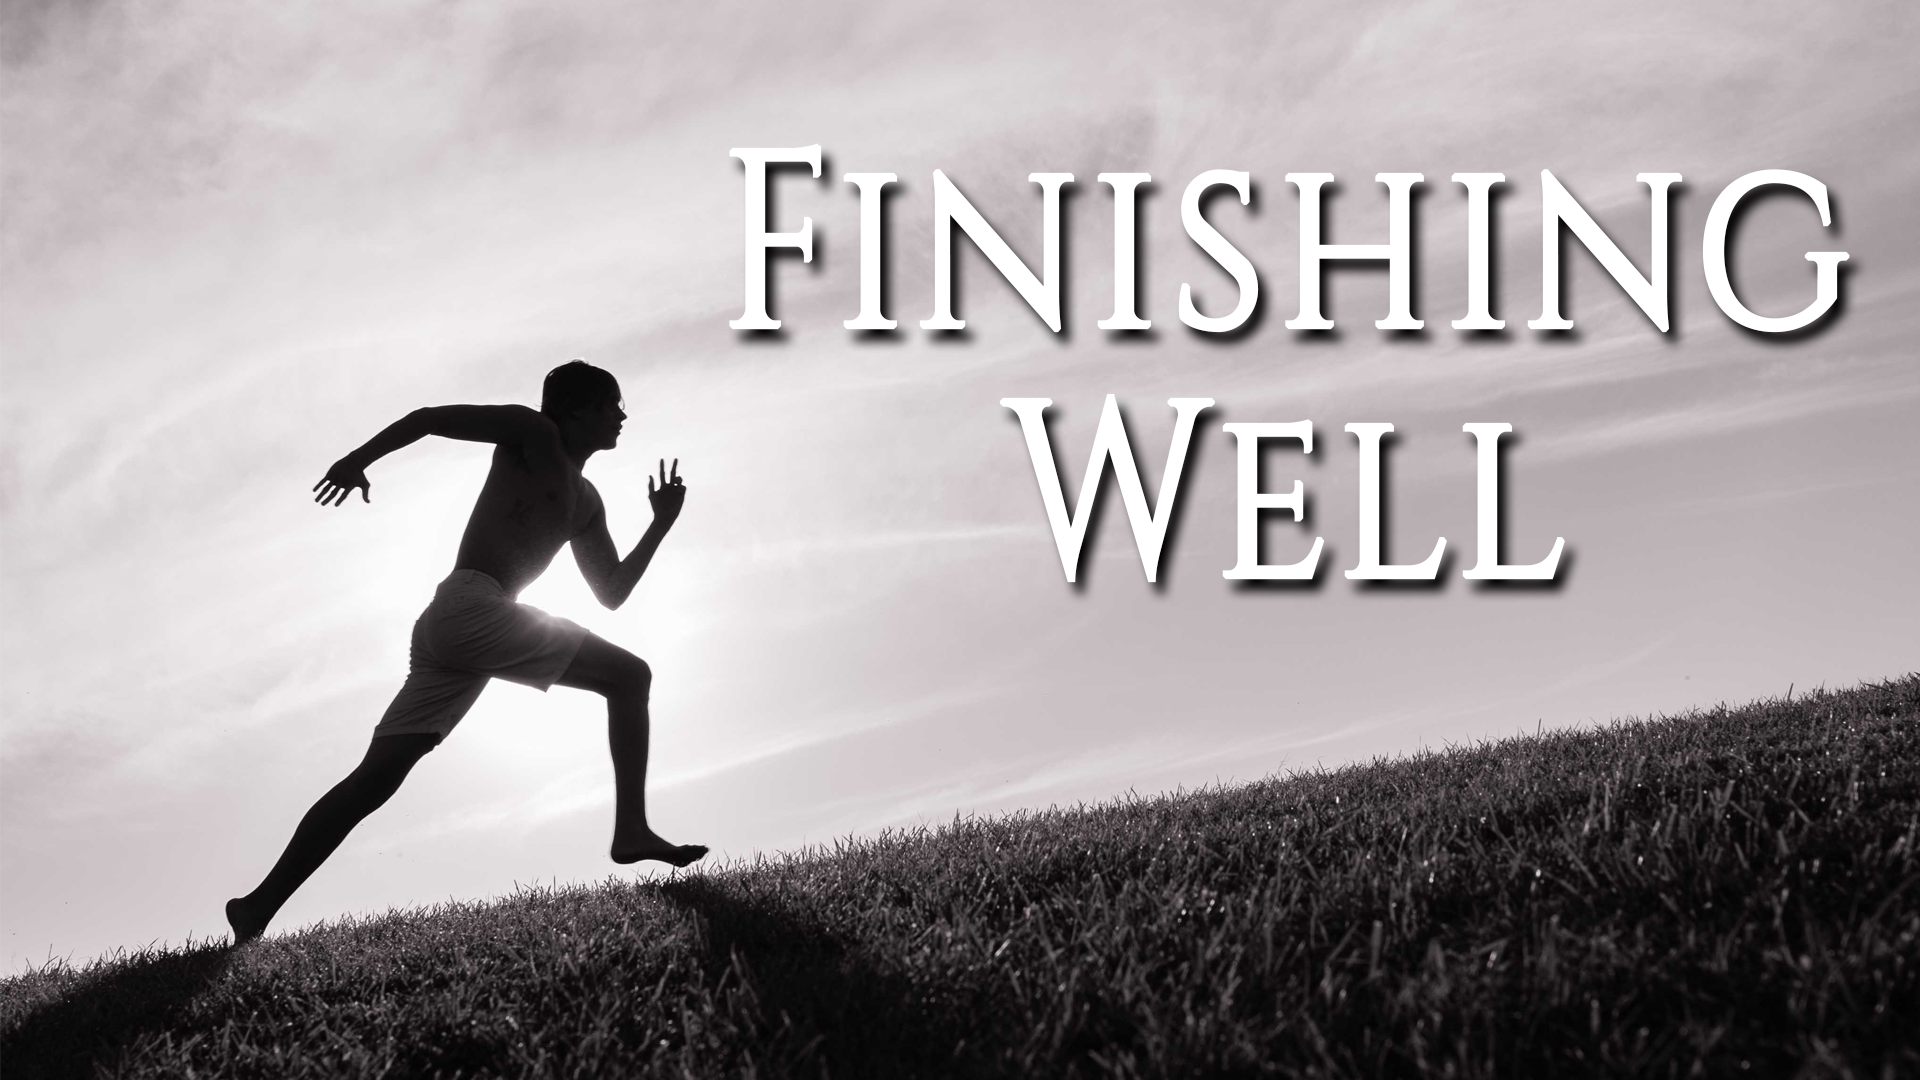 Day 35 – We receive power to endure to the end and to finish well